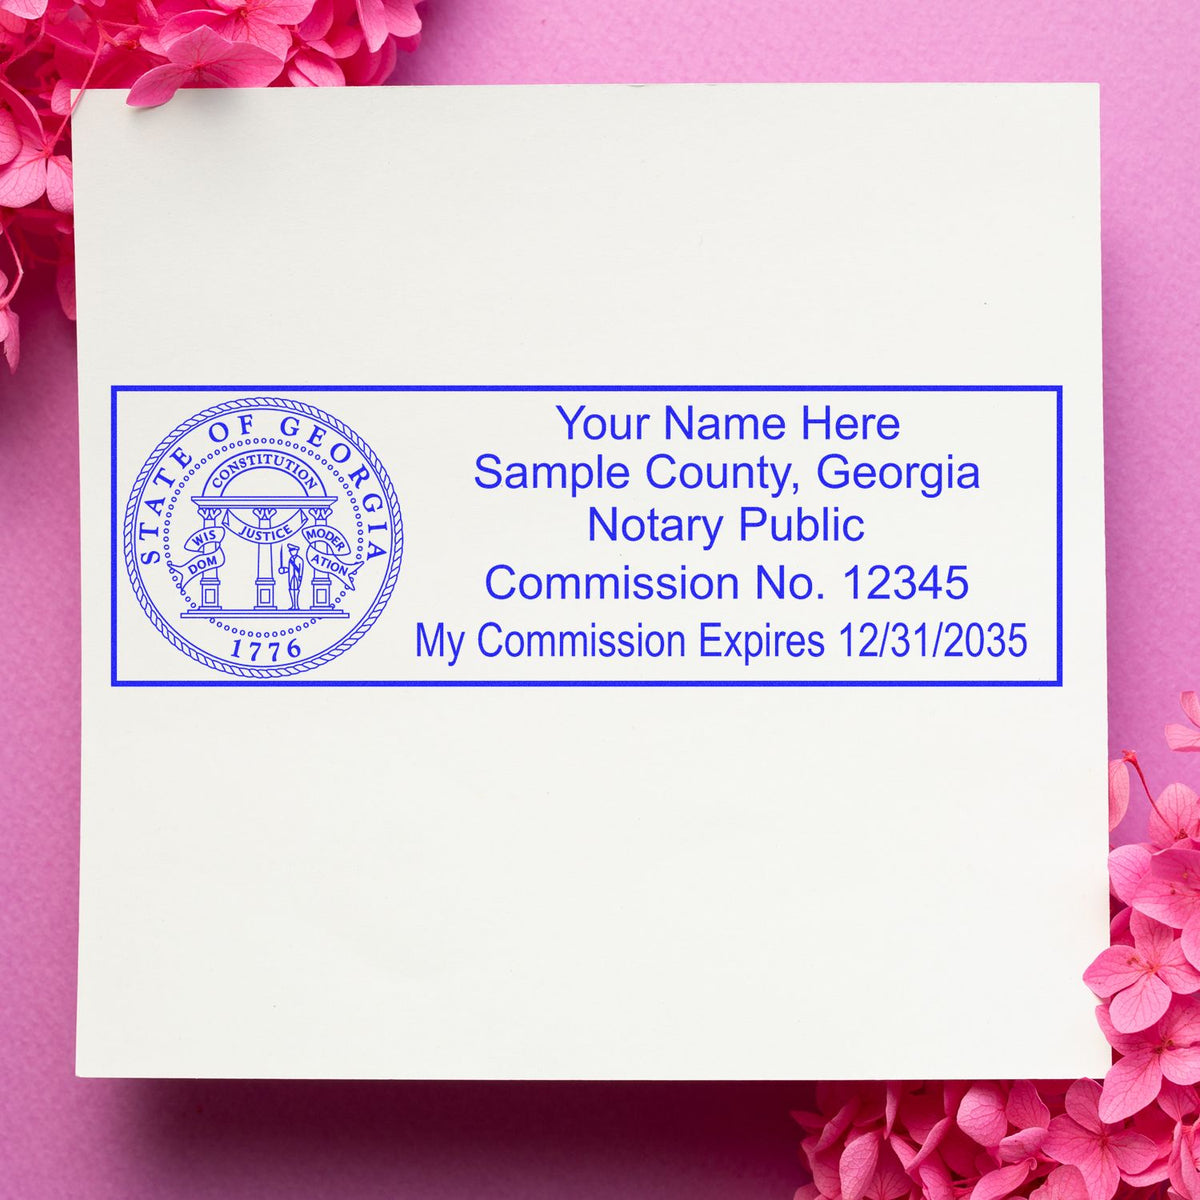 A photograph of the Heavy-Duty Georgia Rectangular Notary Stamp stamp impression reveals a vivid, professional image of the on paper.